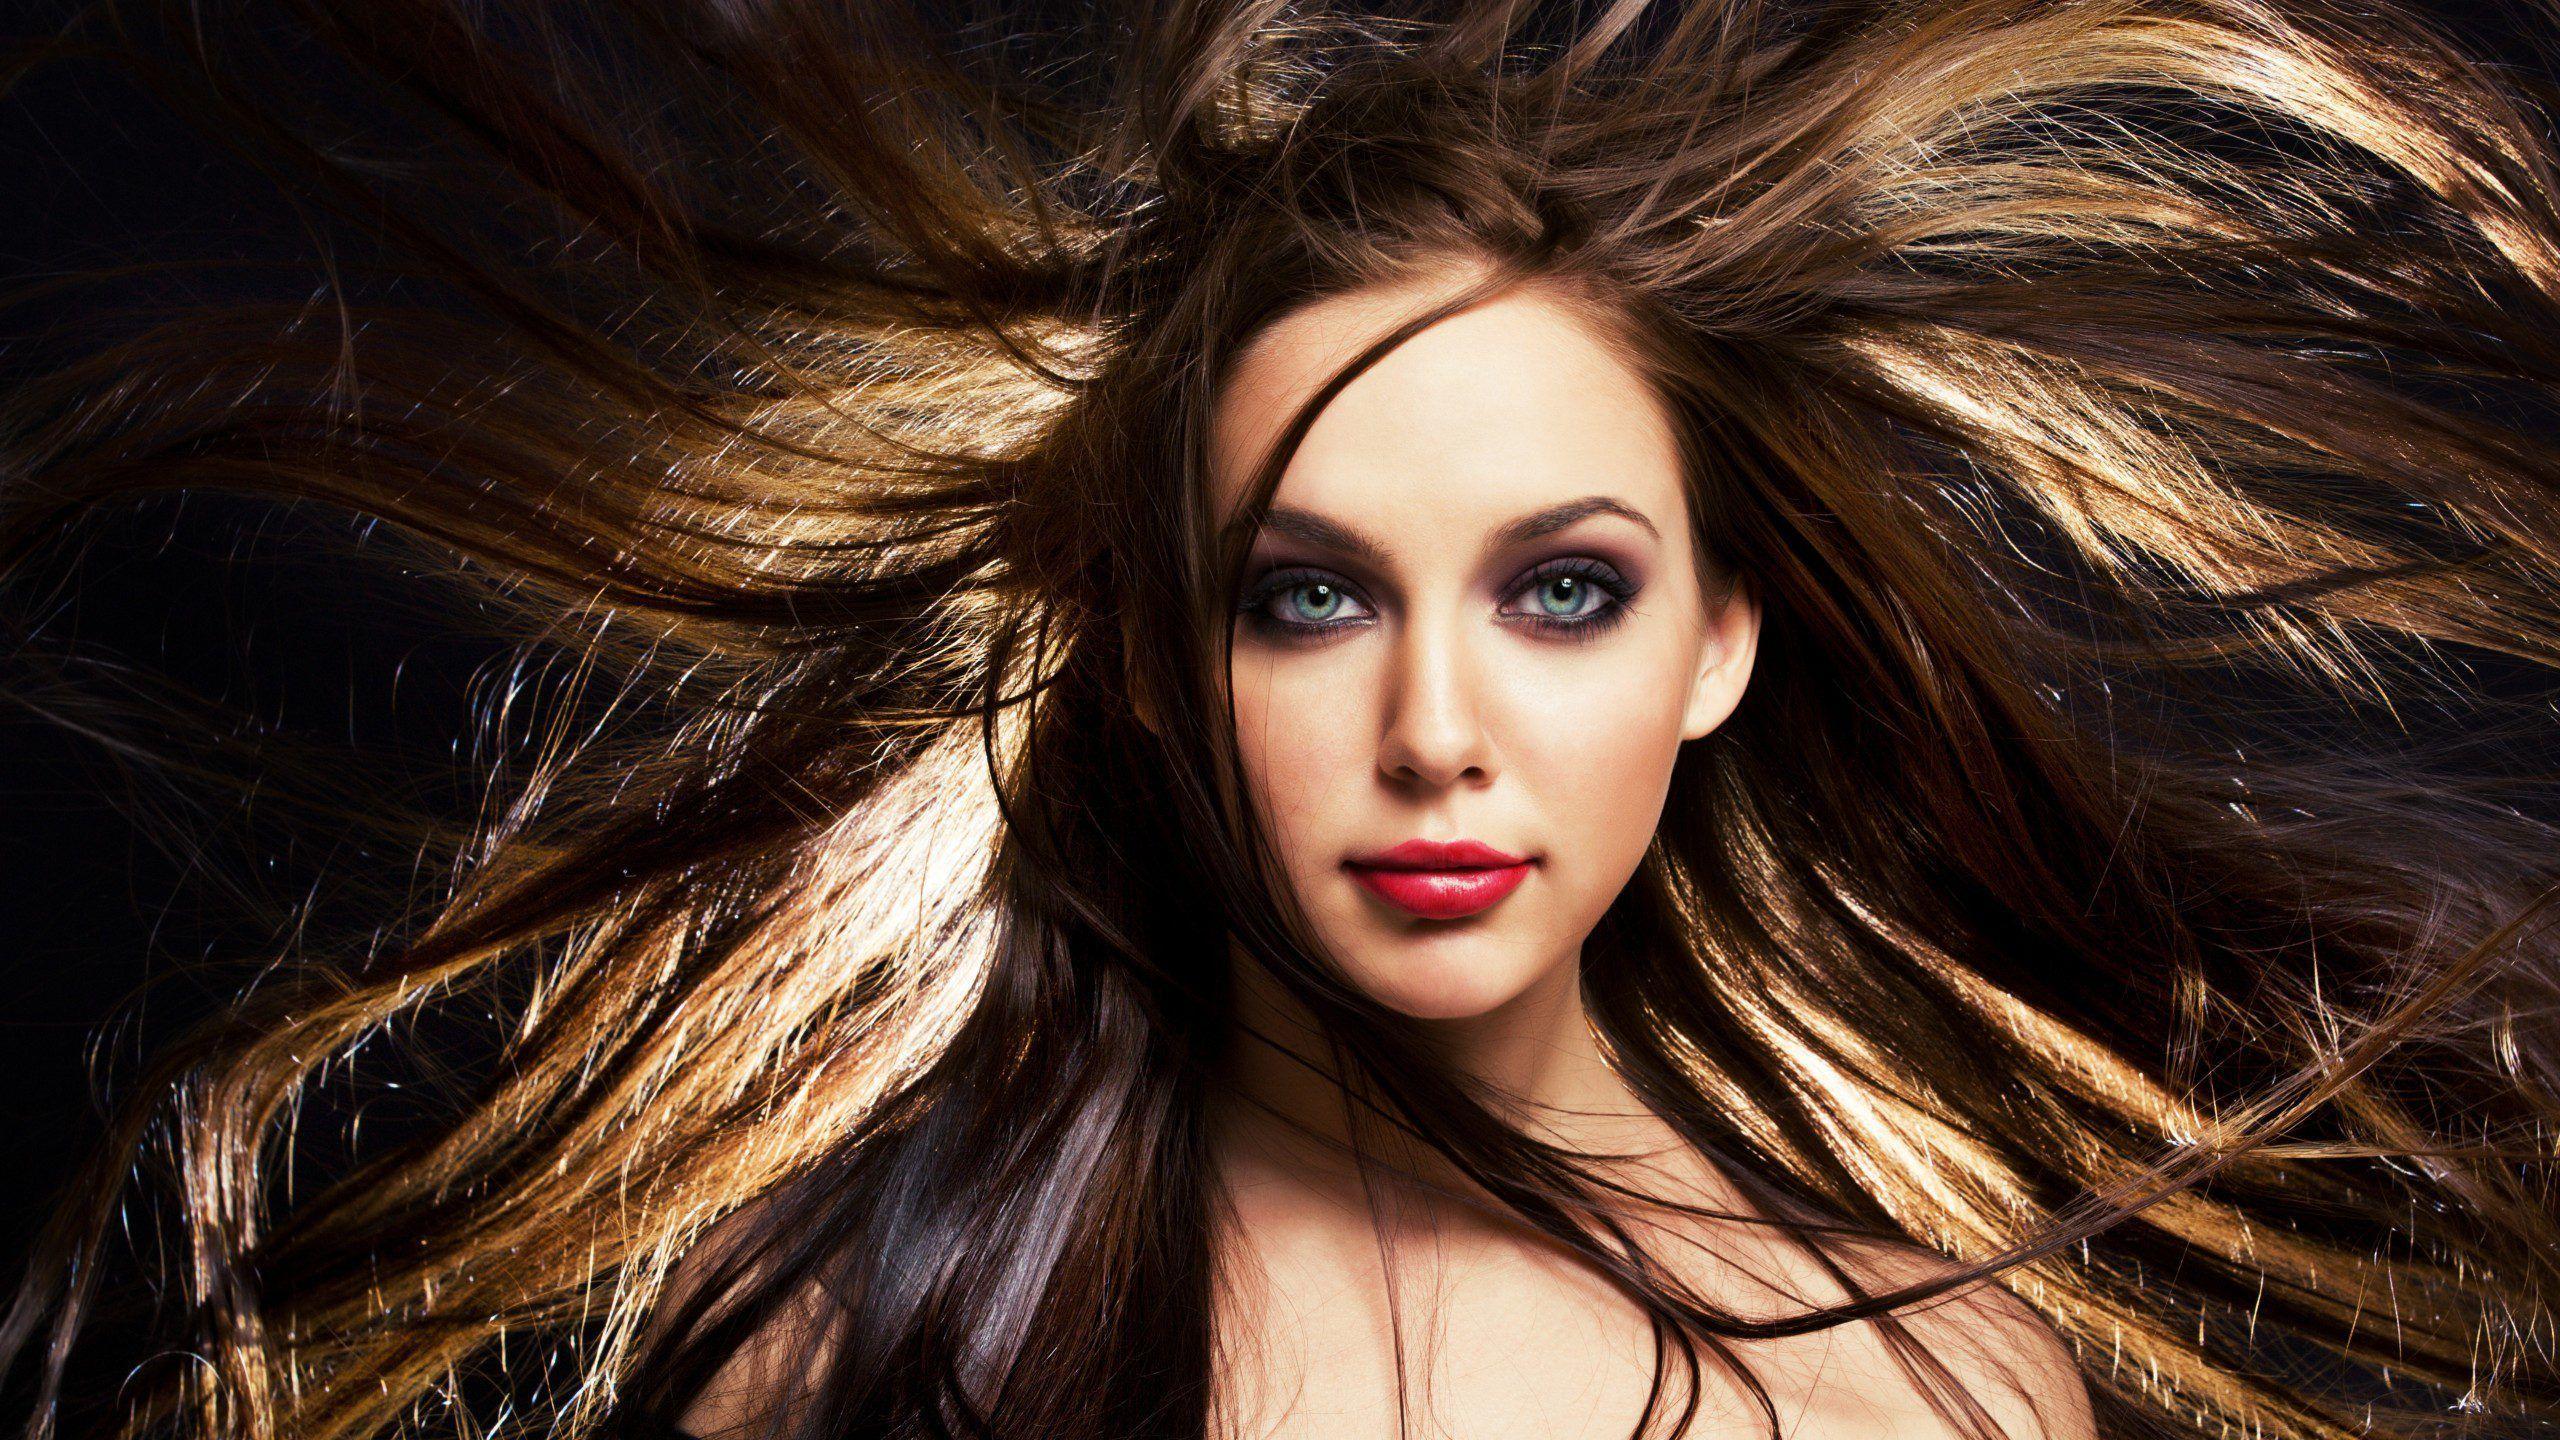 Hair Styles Wallpapers - Wallpaper Cave